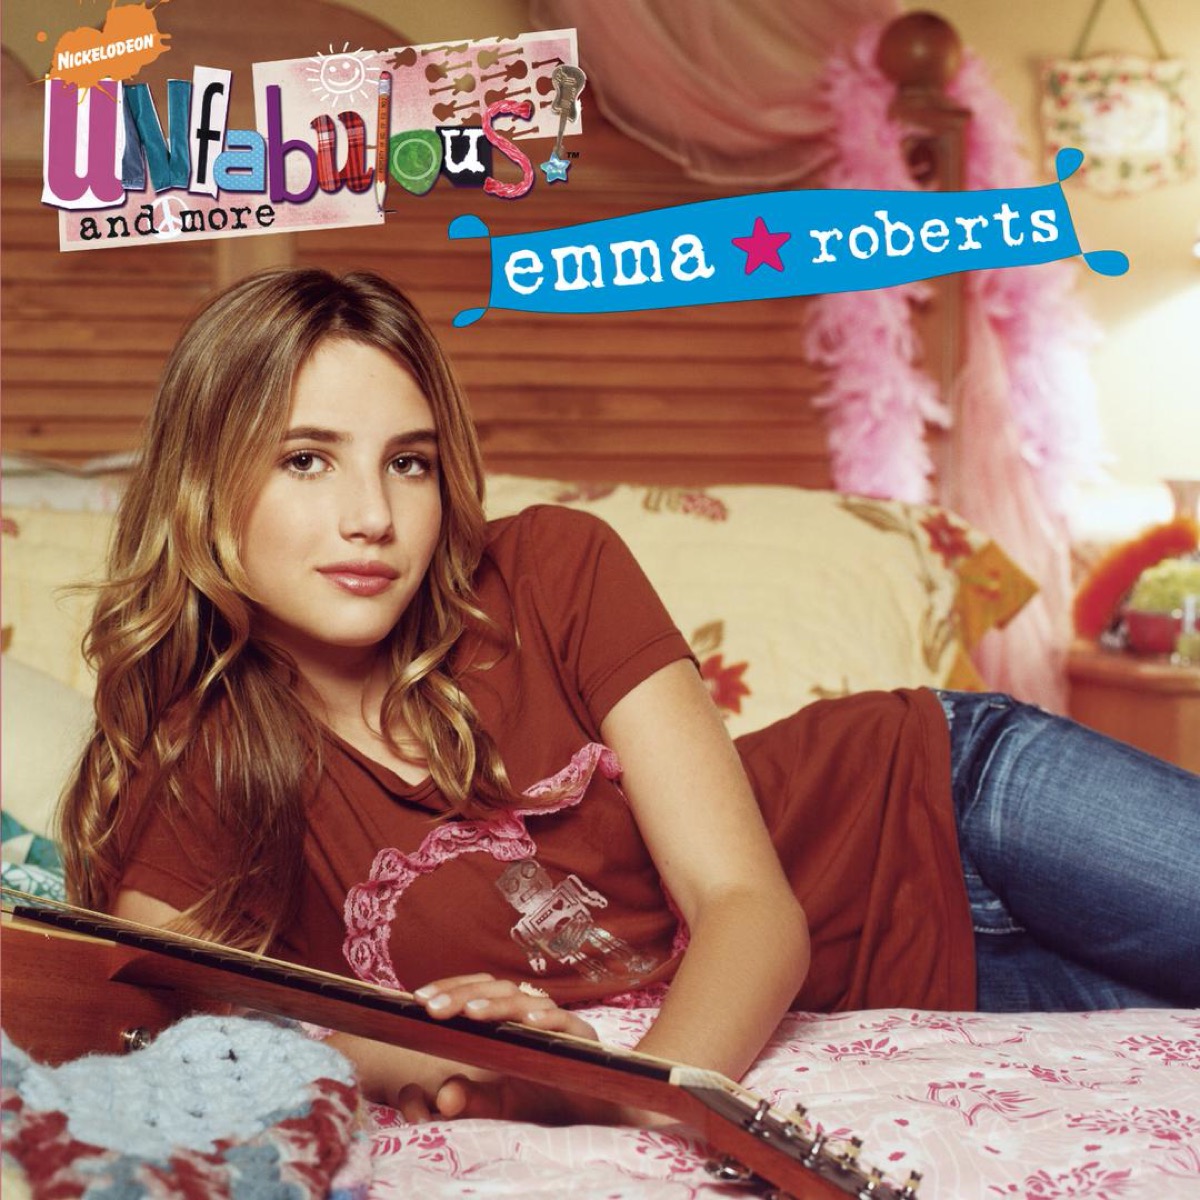 Emma Roberts Unfabulous and More album cover